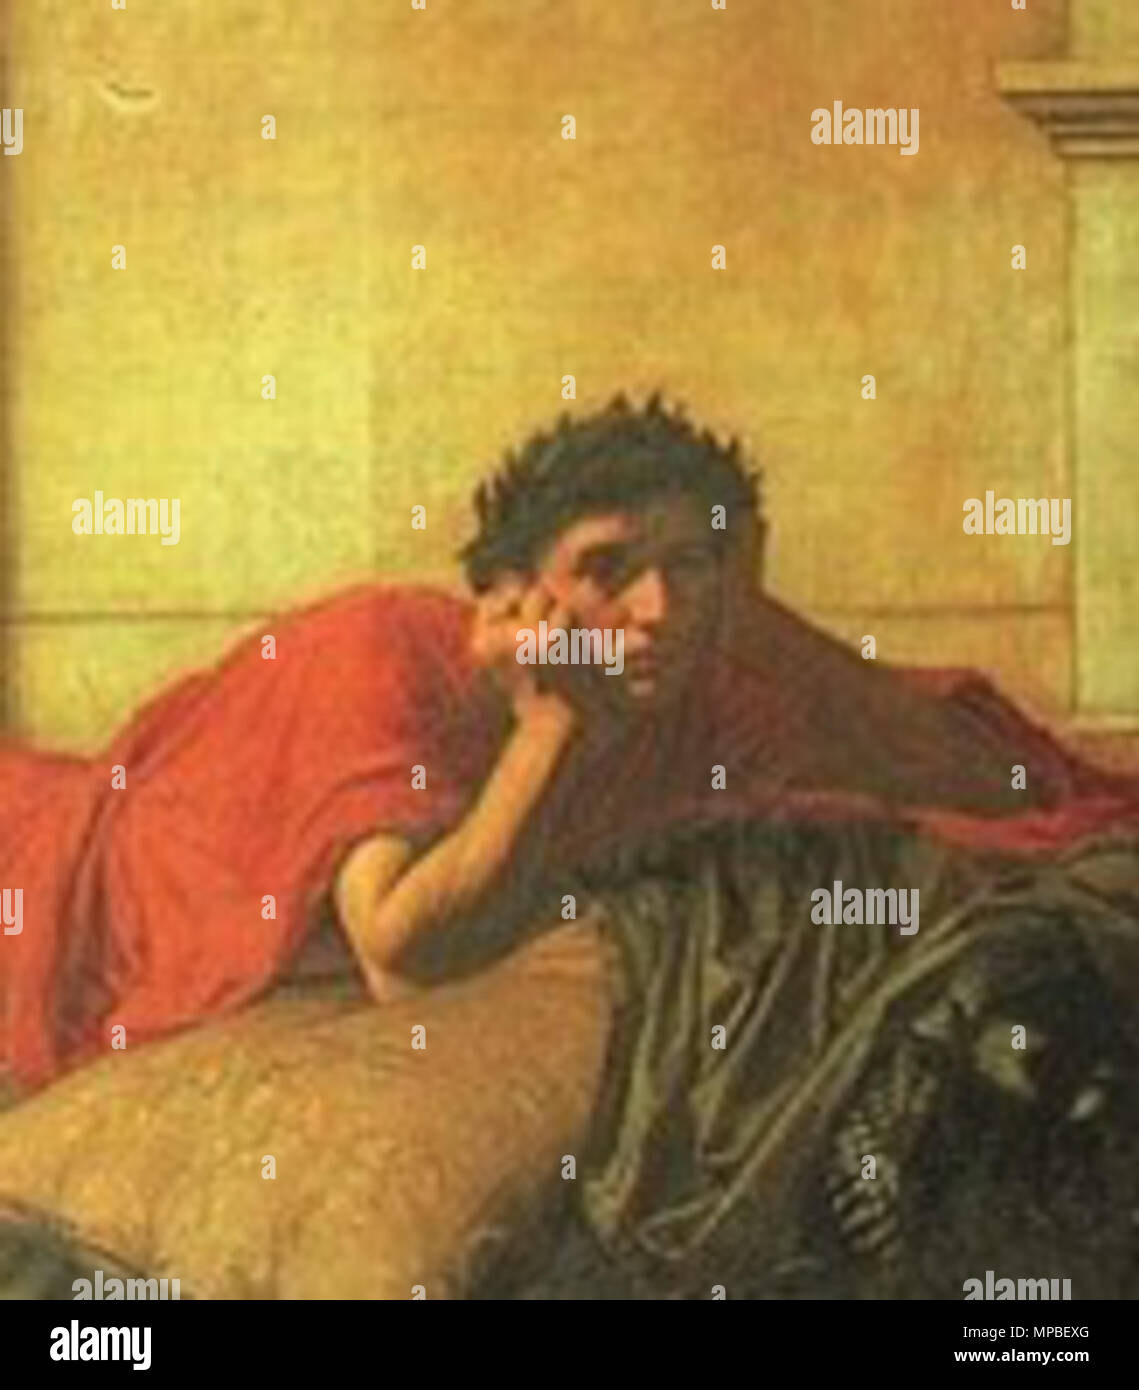 .  English: Crop (head and shoulders) of a painting of the Emperor Nero: 'The remorse of the Emperor After the Murder of his Mother' .  1878 (28 October 2009 (original upload date)).    John William Waterhouse  (1849–1917)     Alternative names J. W. Waterhouse; John Waterhouse  Description British-Italian painter  Date of birth/death 6 April 1849 10 February 1917  Location of birth/death Rome London  Work period 1870–1917  Work location United Kingdom  Authority control  : Q212754 VIAF: 8187046 ISNI: 0000 0000 8195 6522 ULAN: 500027032 LCCN: n79044158 NLA: 35940754 WorldCat 922 Nero Crop Stock Photo